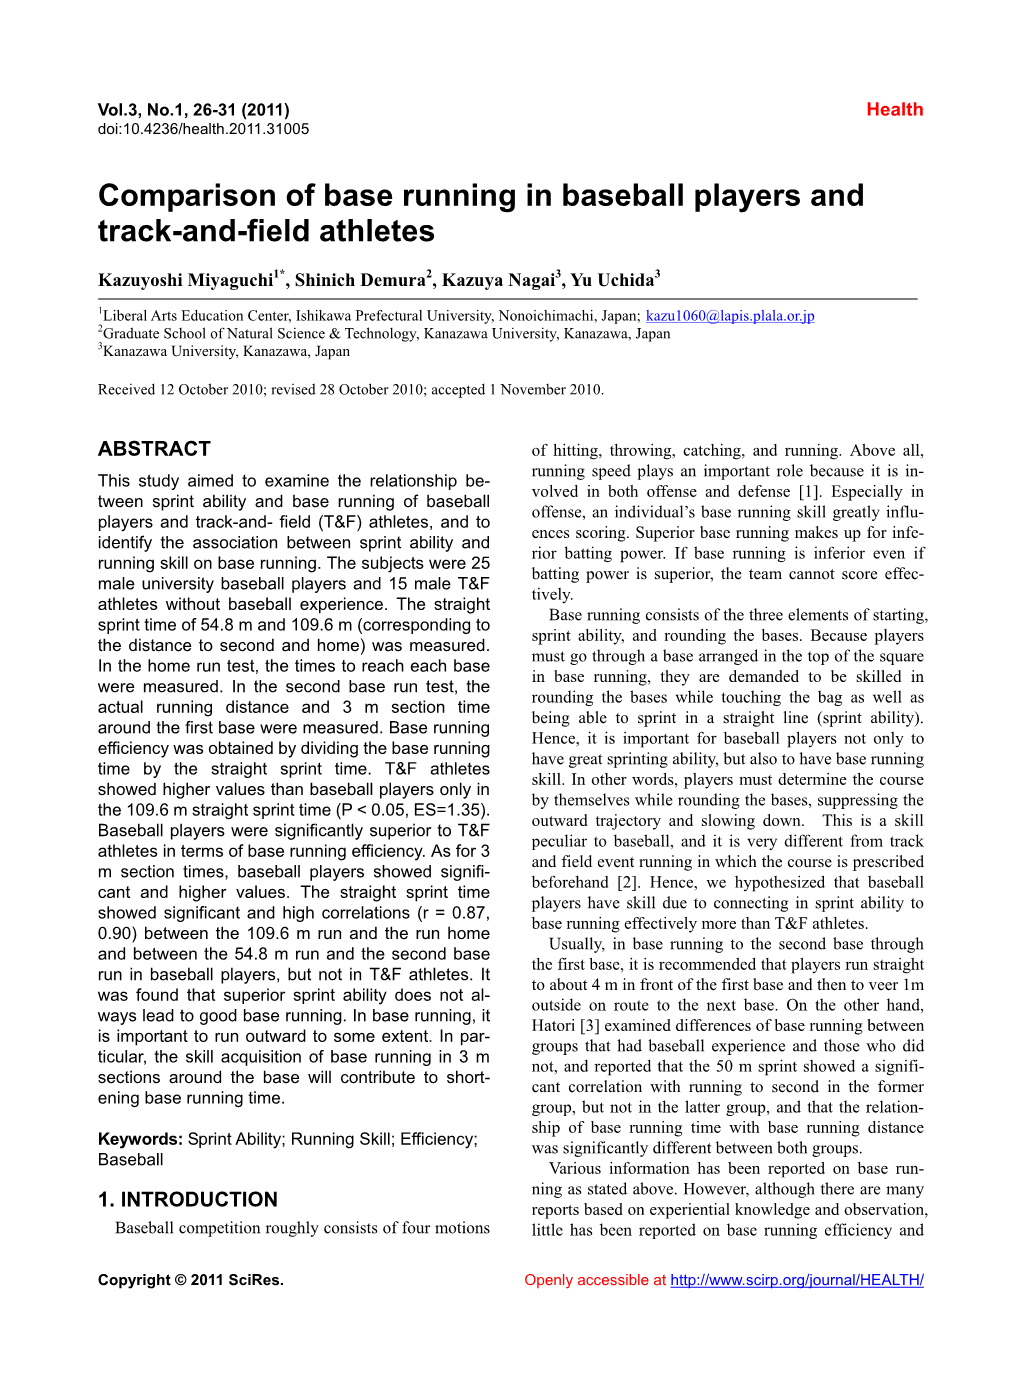 Comparison of Base Running in Baseball Players and Track-And-Field Athletes